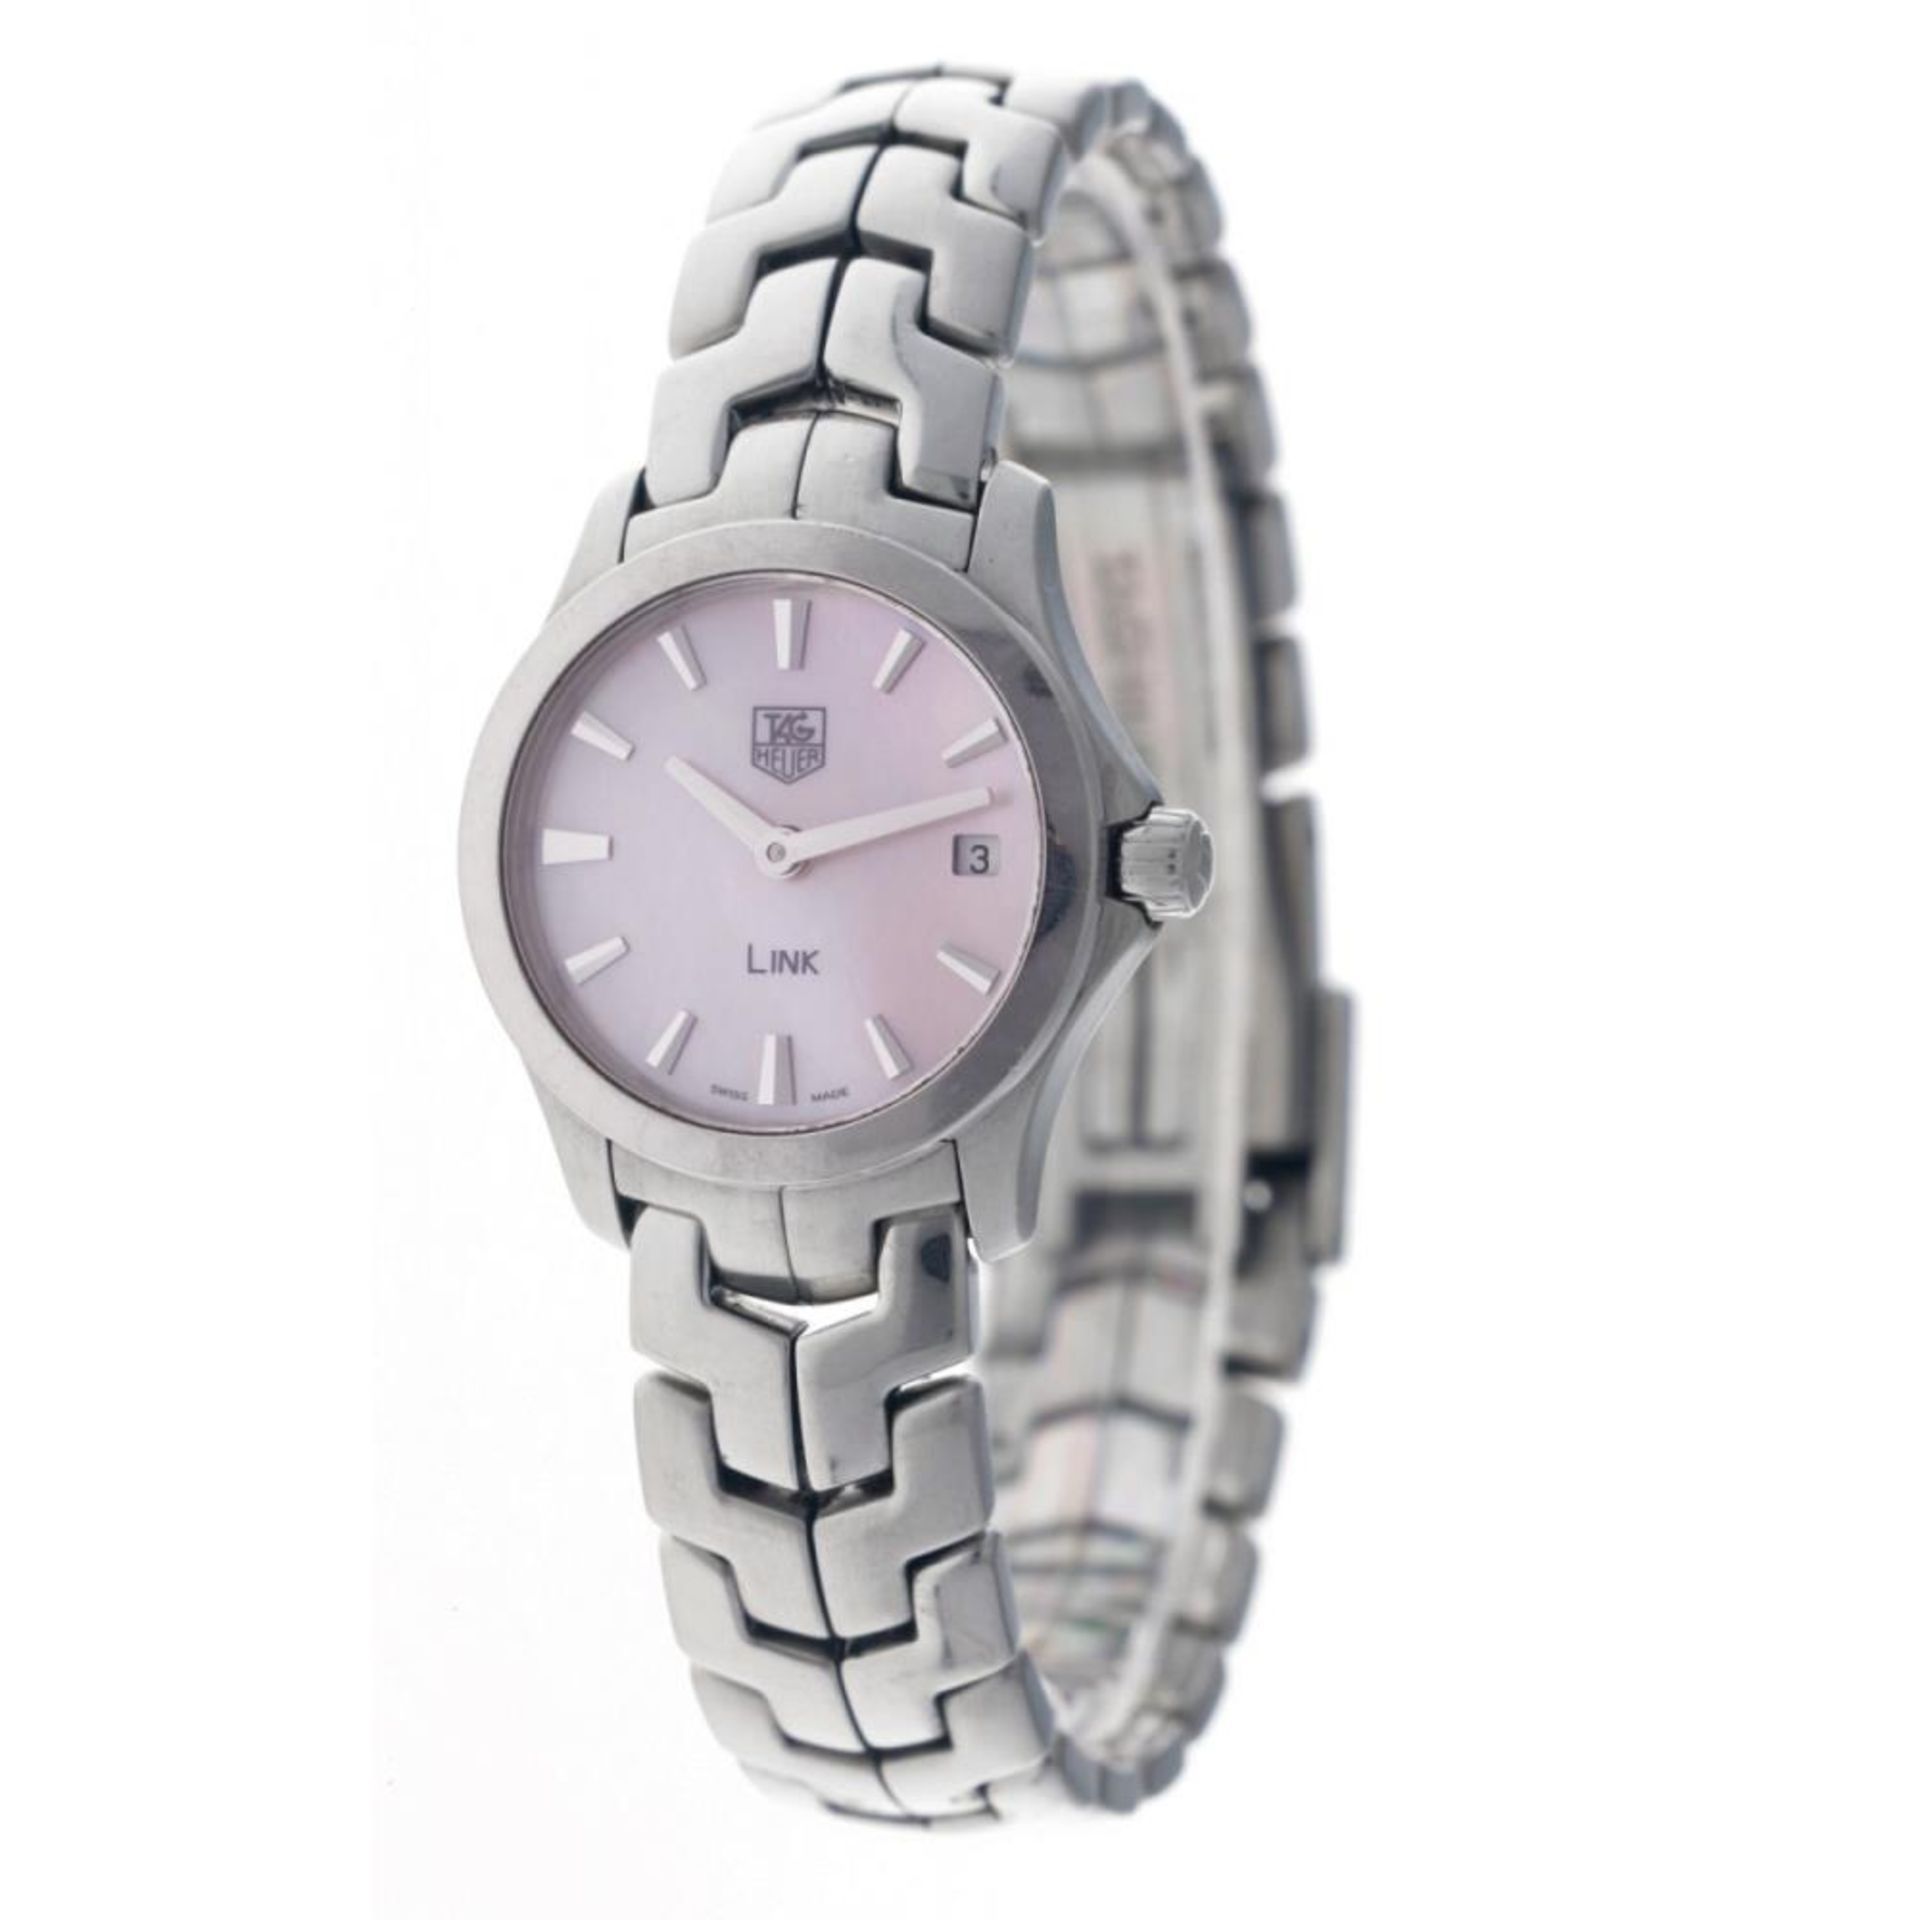 TAG Heuer Link WJF1412 - Pink Mother of Pearl - Ladies watch - approx. 2013. - Image 4 of 10